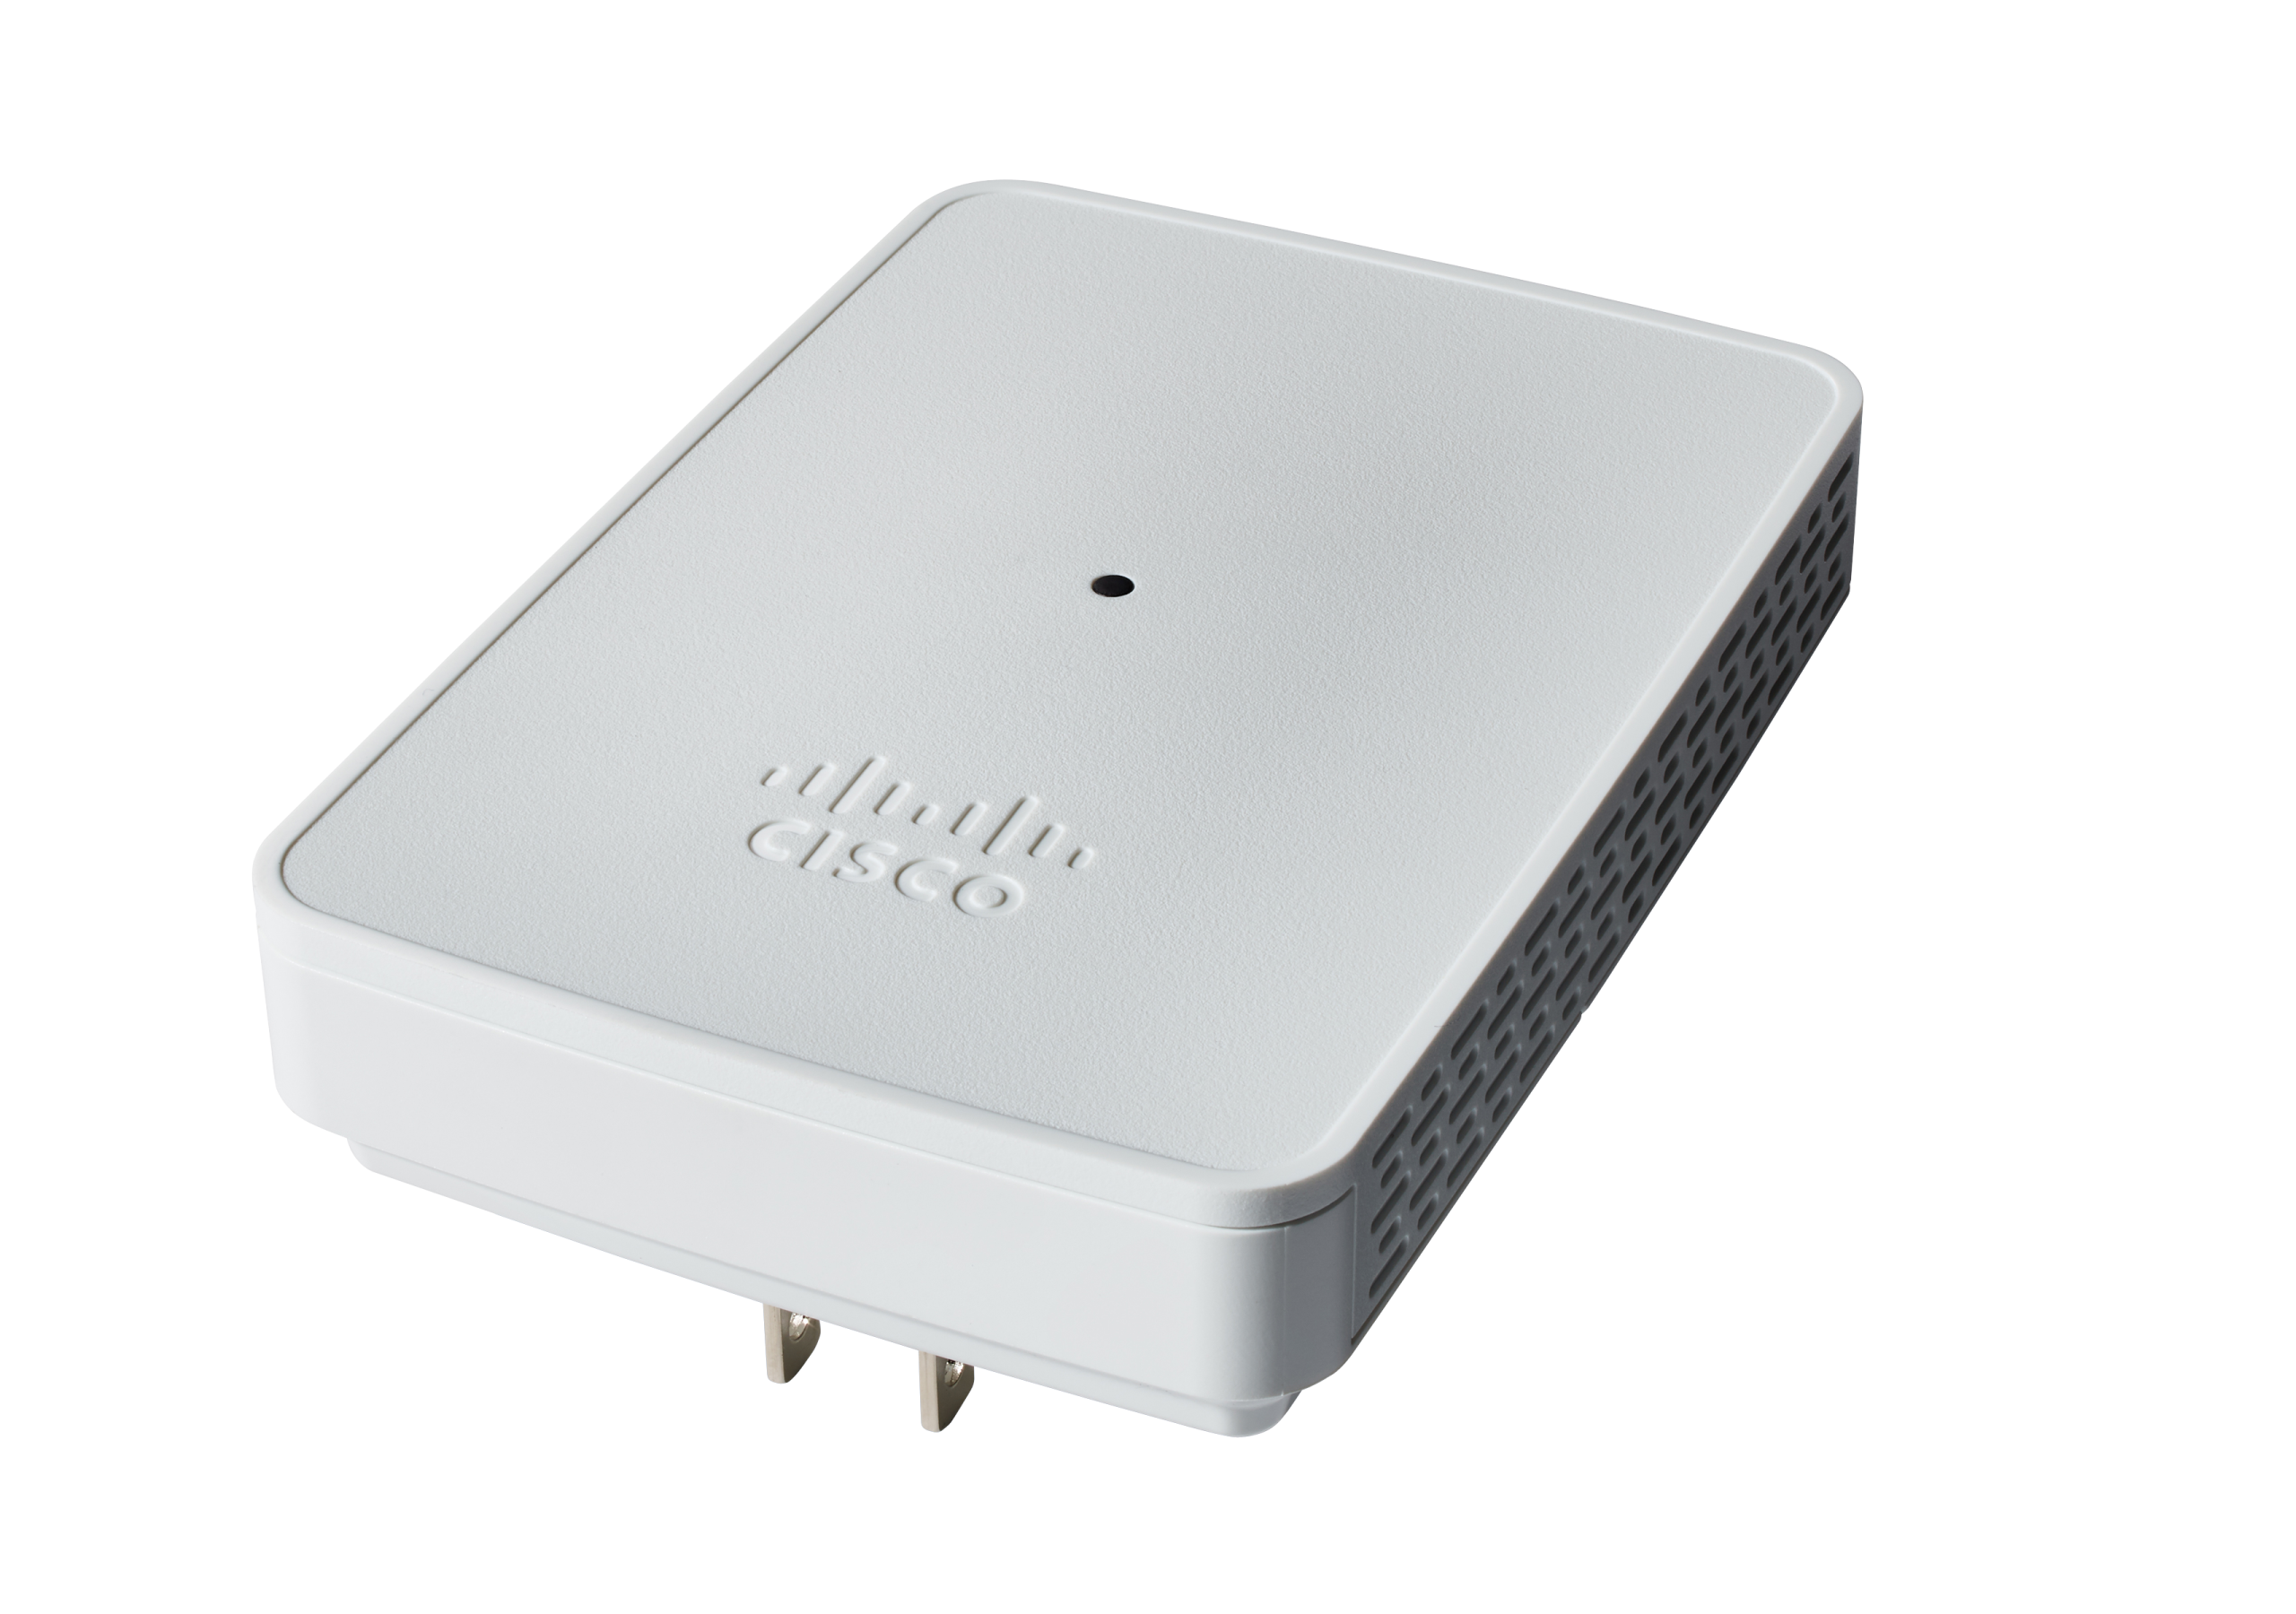 Picture of Cisco 142ACM IEEE 802.11ac 867 Mbit/s Wireless Range Extender - 2.40 GHz, 5 GHz - MIMO Technology - Plug-in, Wall Mountable